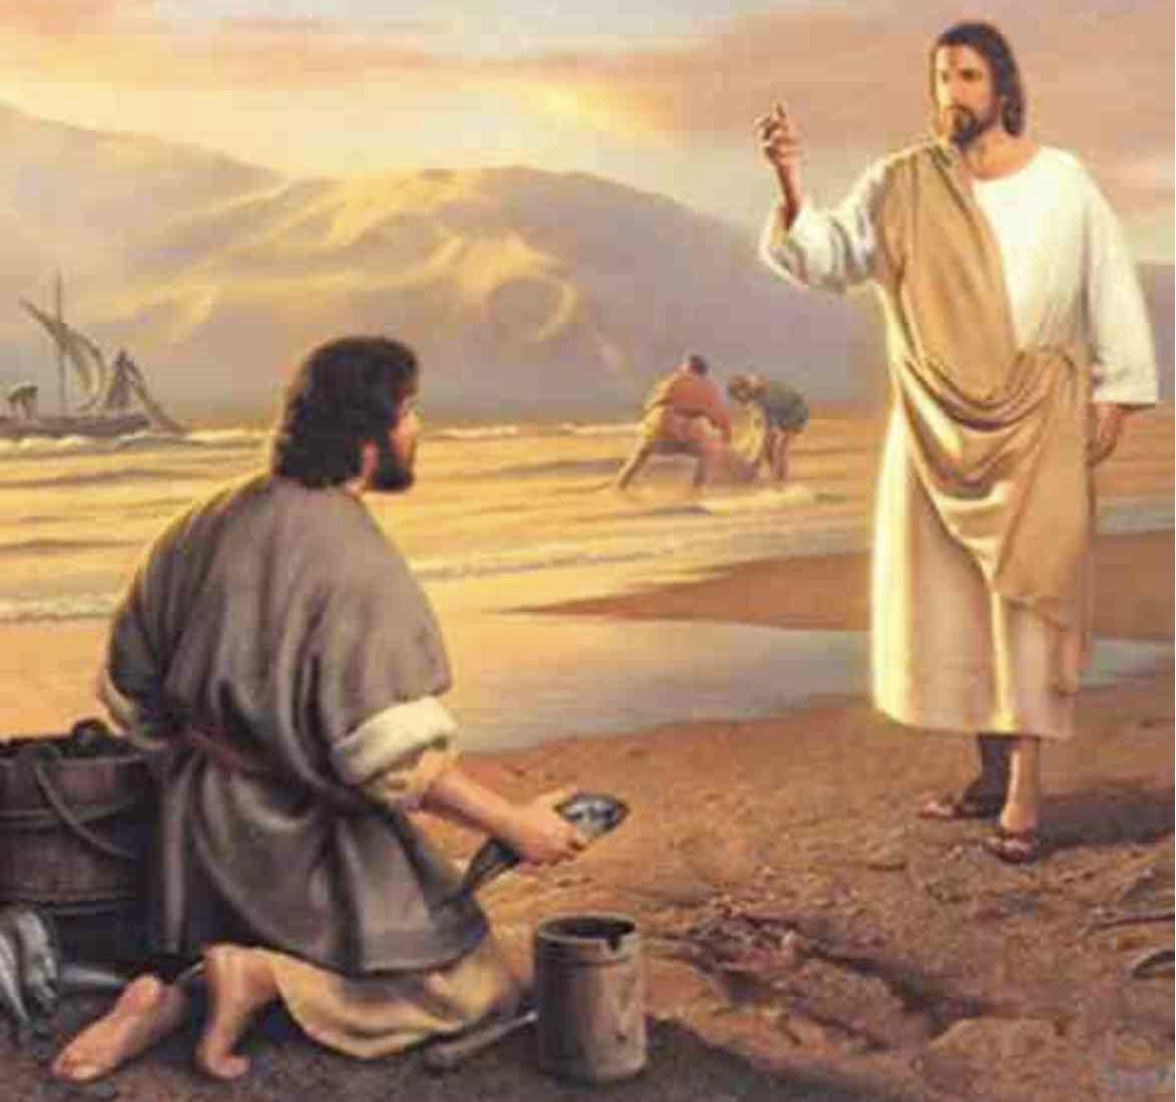 JESUS & THE FISHERMAN #2: Having the Preacher Over…and Fishing for Souls